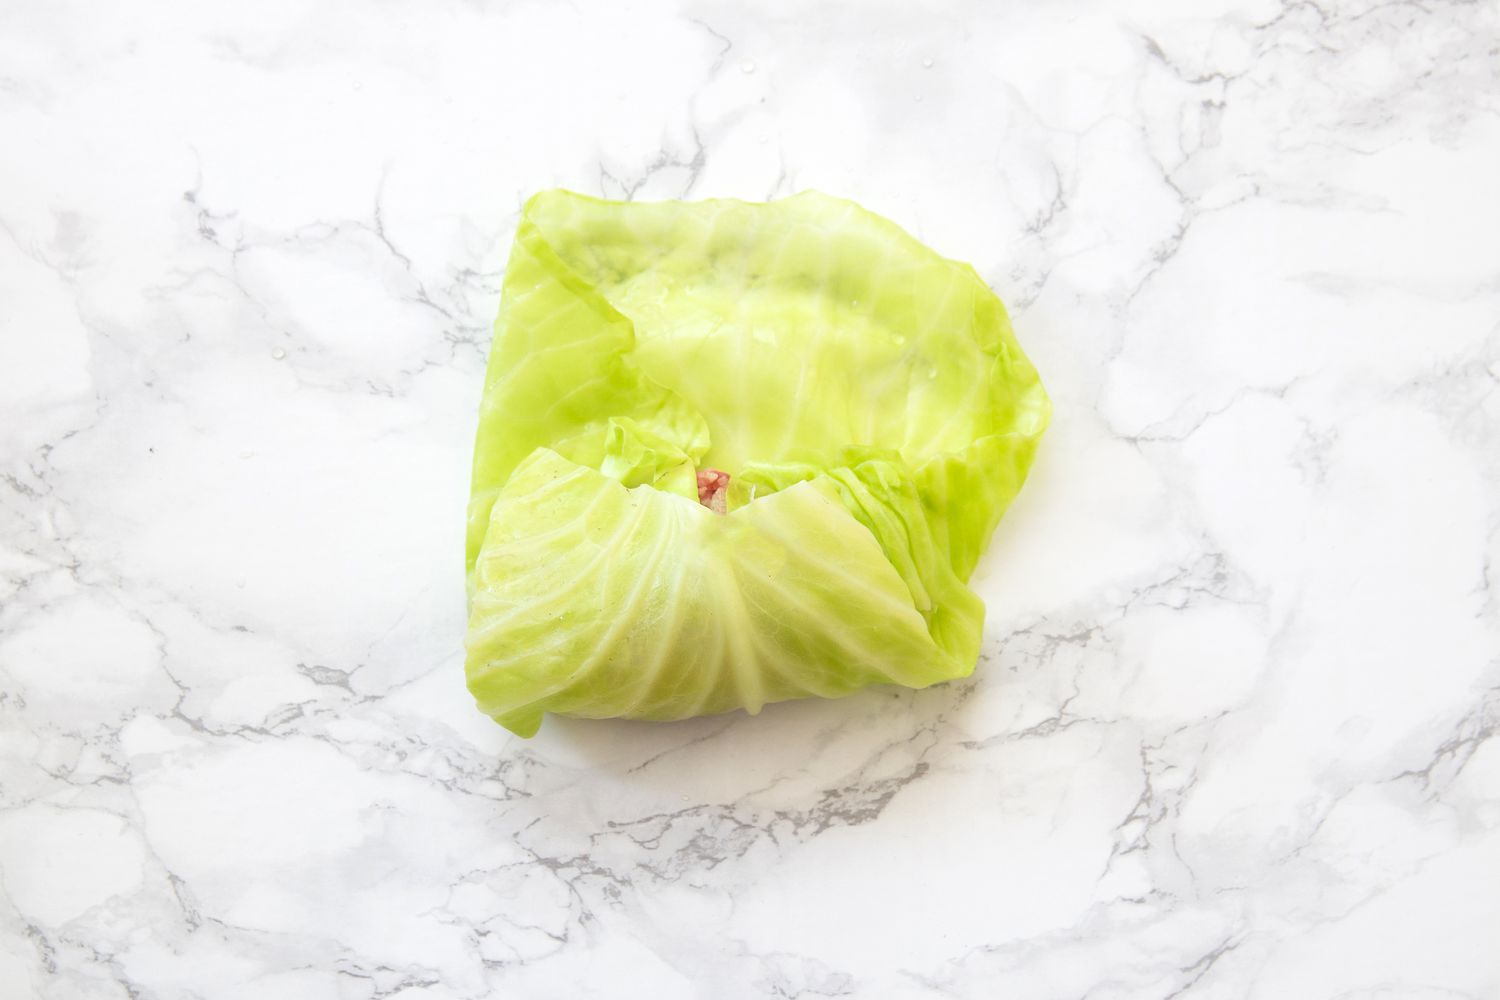 Cabbage leaf stuffed and rolled up on a white marble table